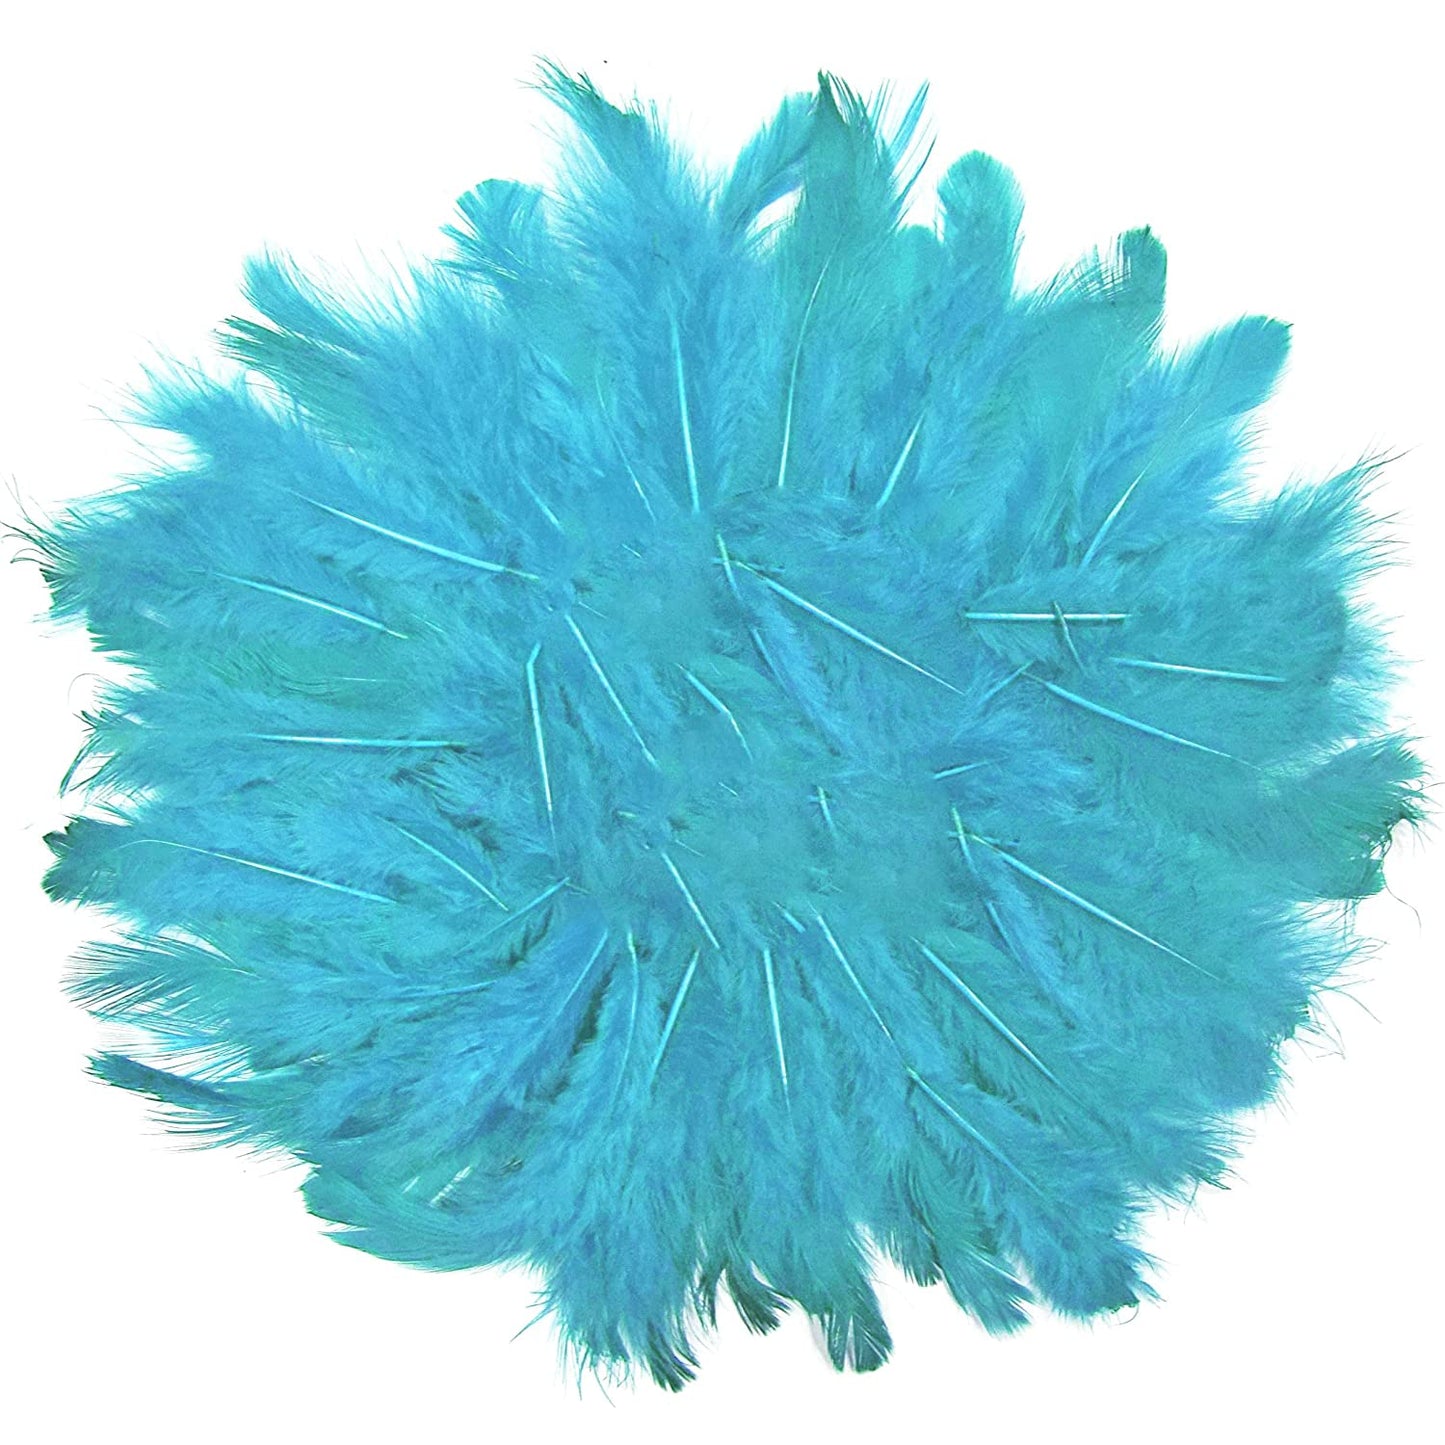 Naturally Dyed Feathers Pack of 80 Pcs